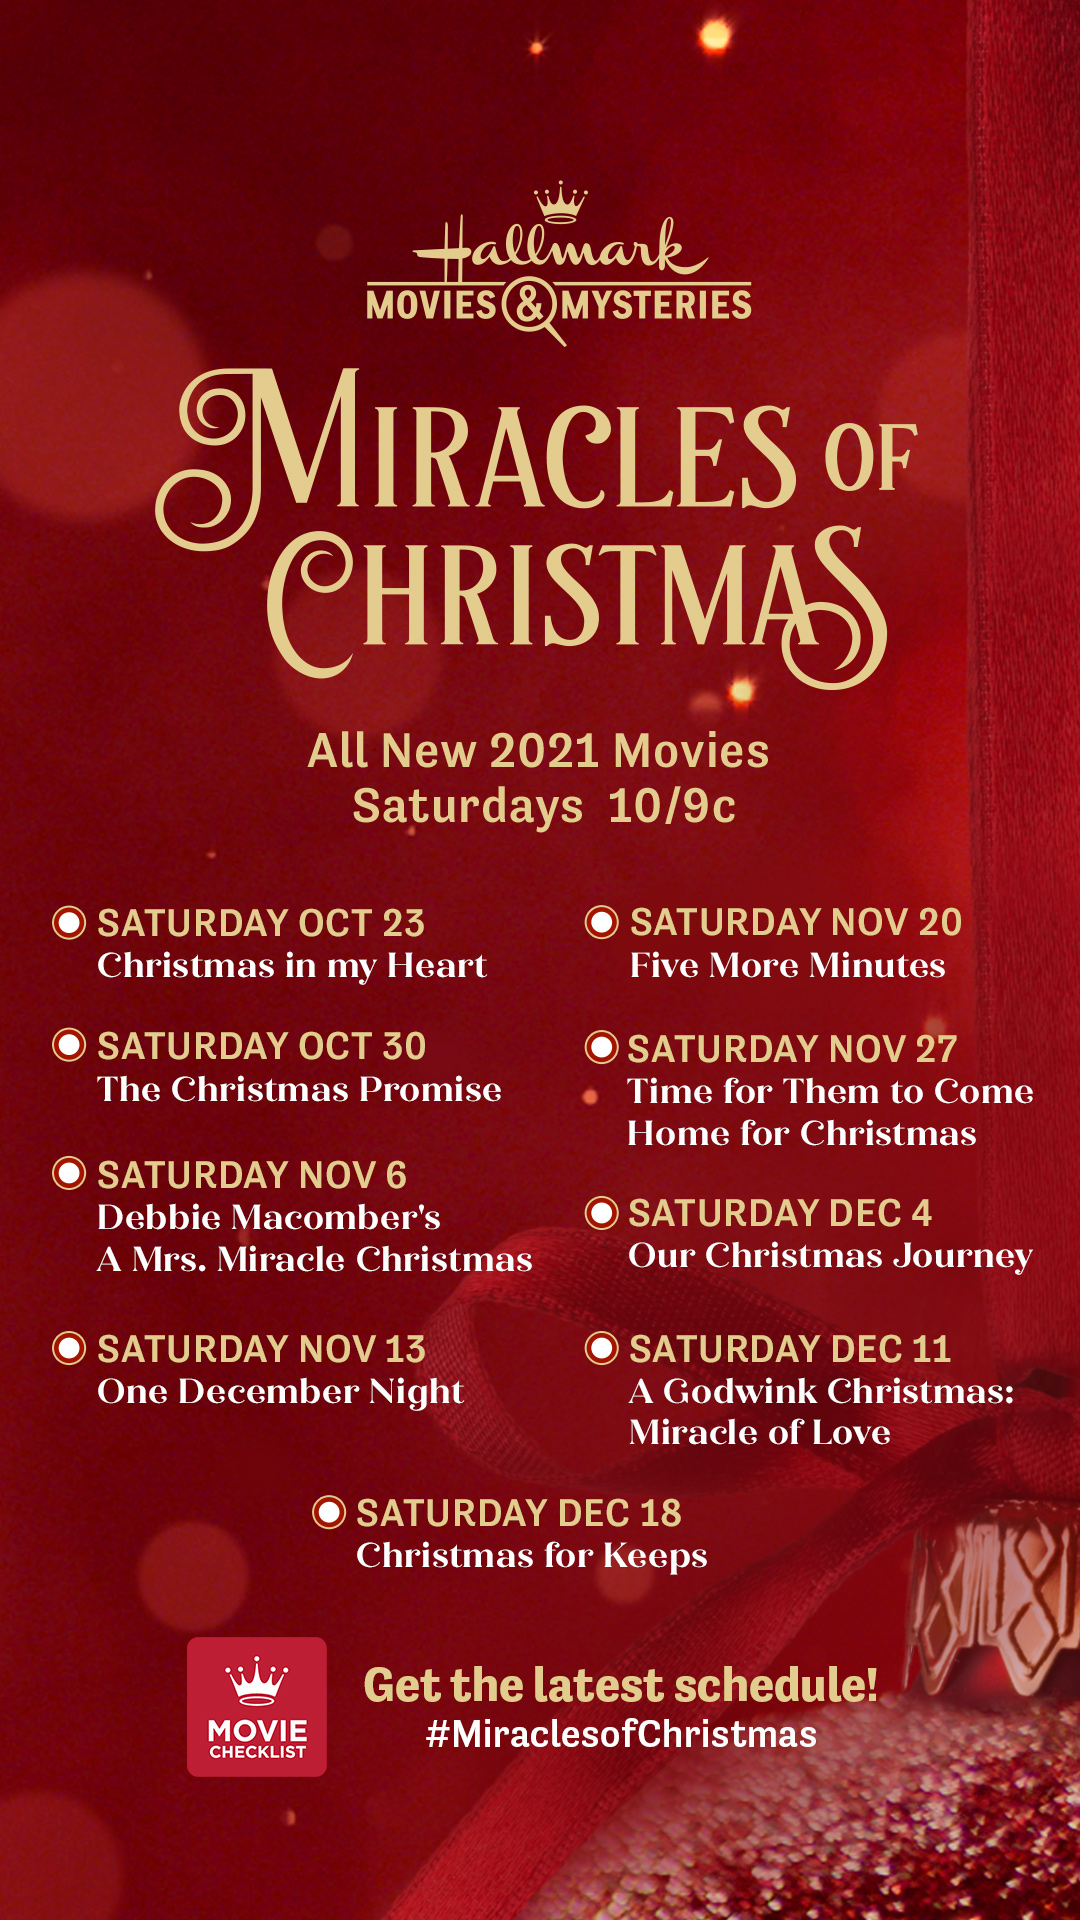 Hallmark Movies & Mysteries Original Premiere of "A Godwink Christmas: Miracle of Love"